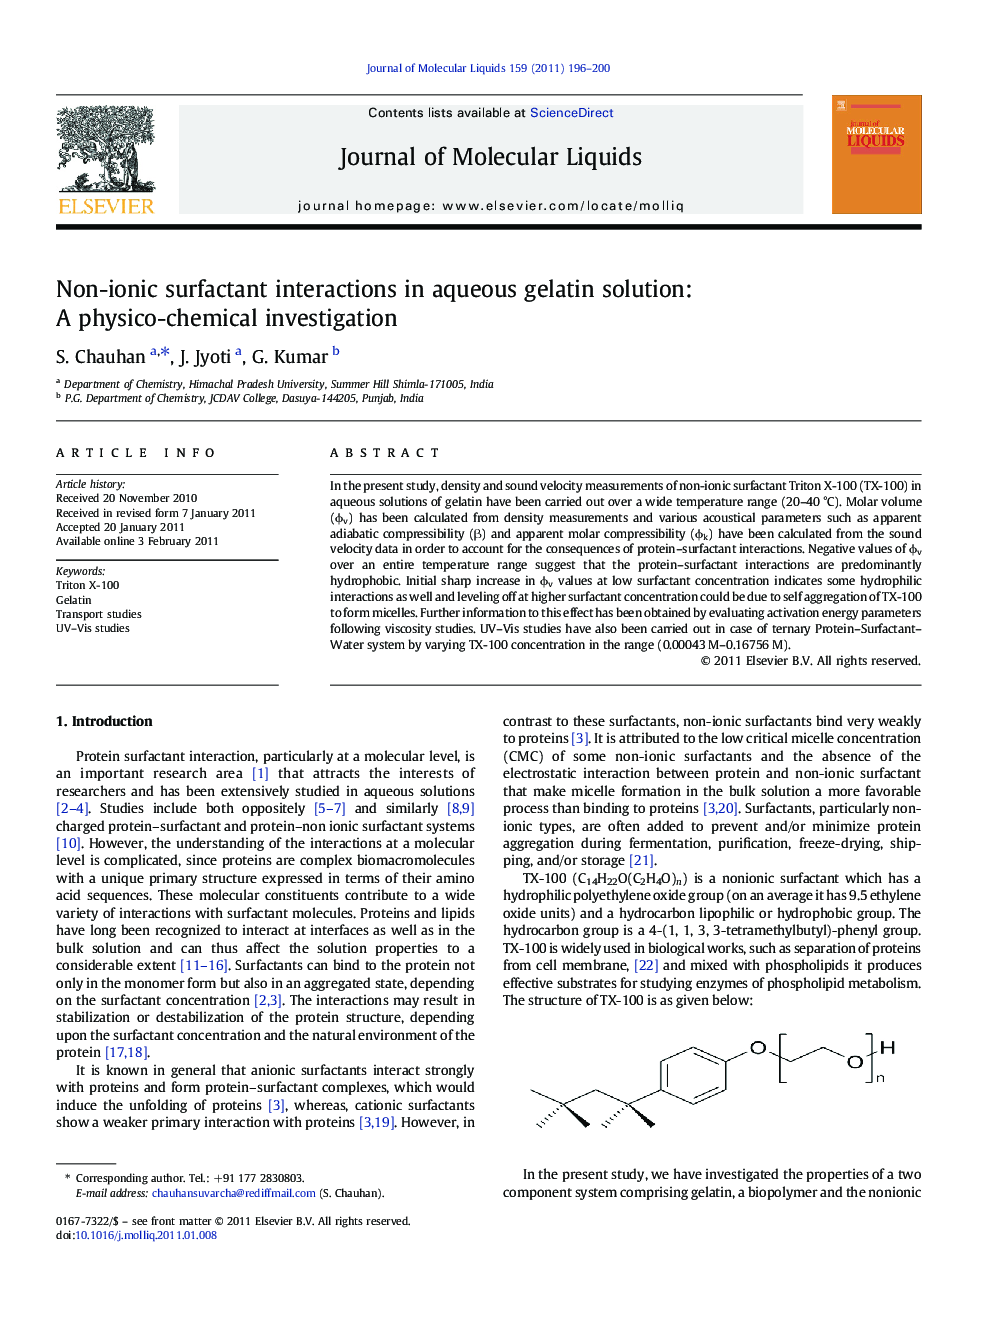 Non-ionic surfactant interactions in aqueous gelatin solution: A physico-chemical investigation